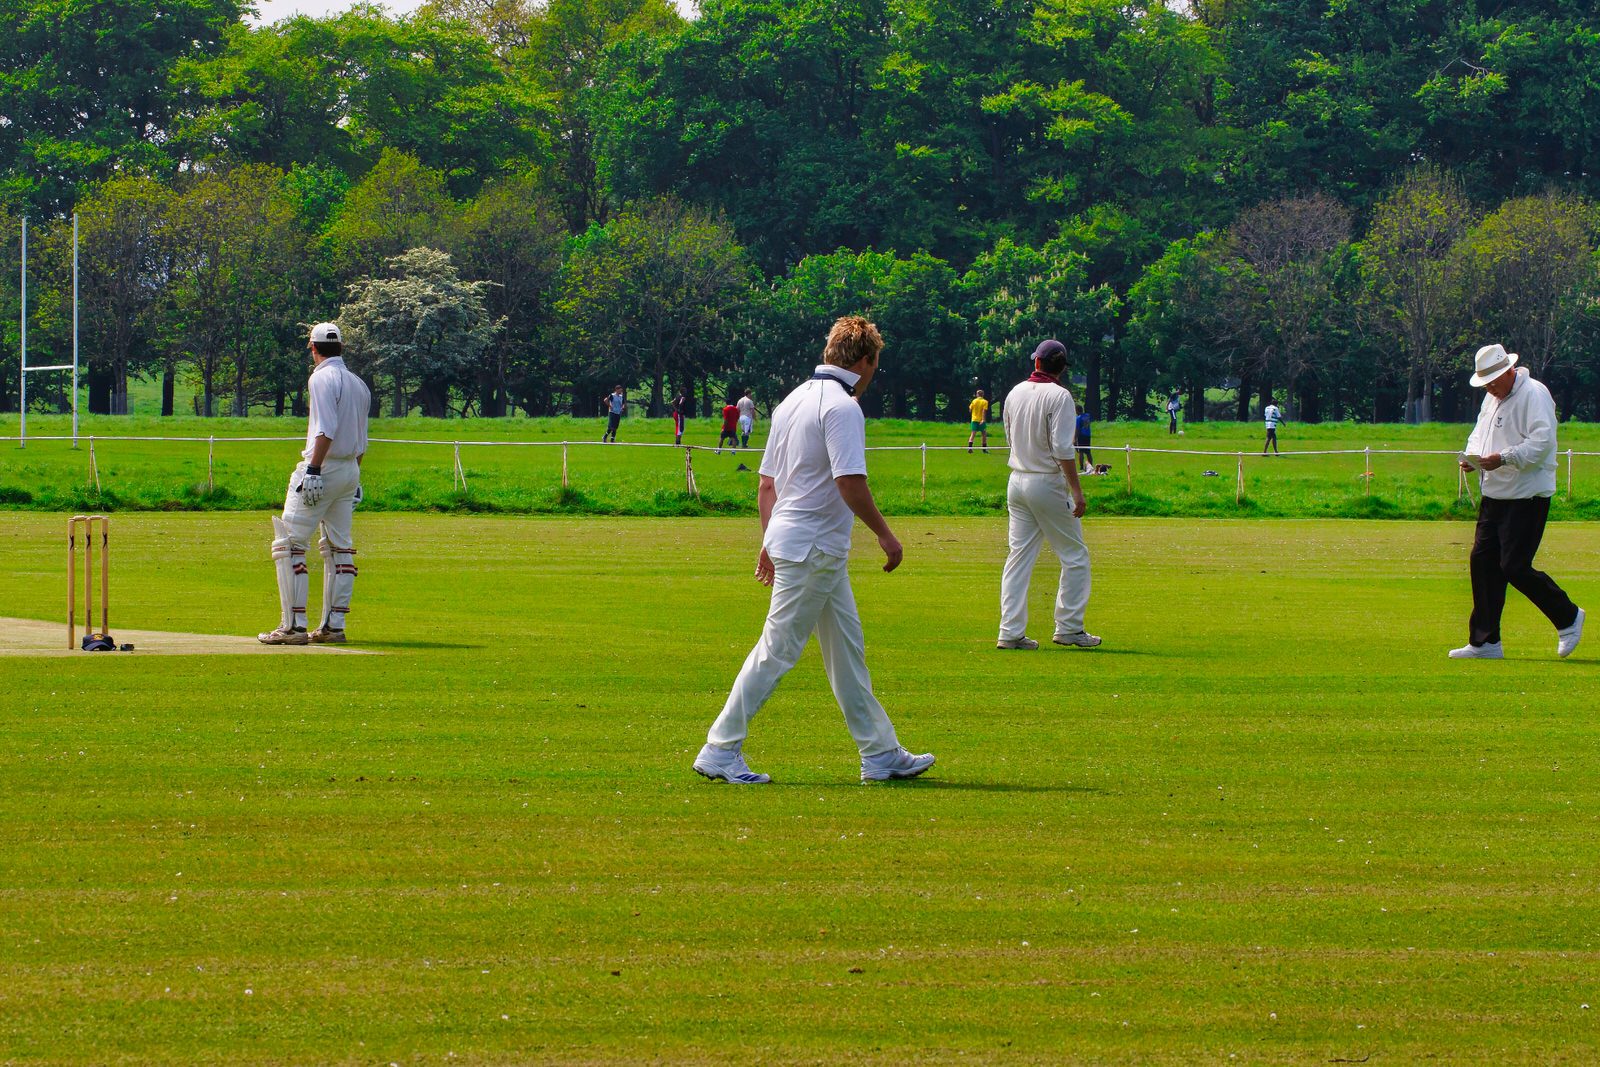 TWO CRICKET CLUBS IN PHOENIX PARK NEAR THE WELLINGTON MONUMENT 018